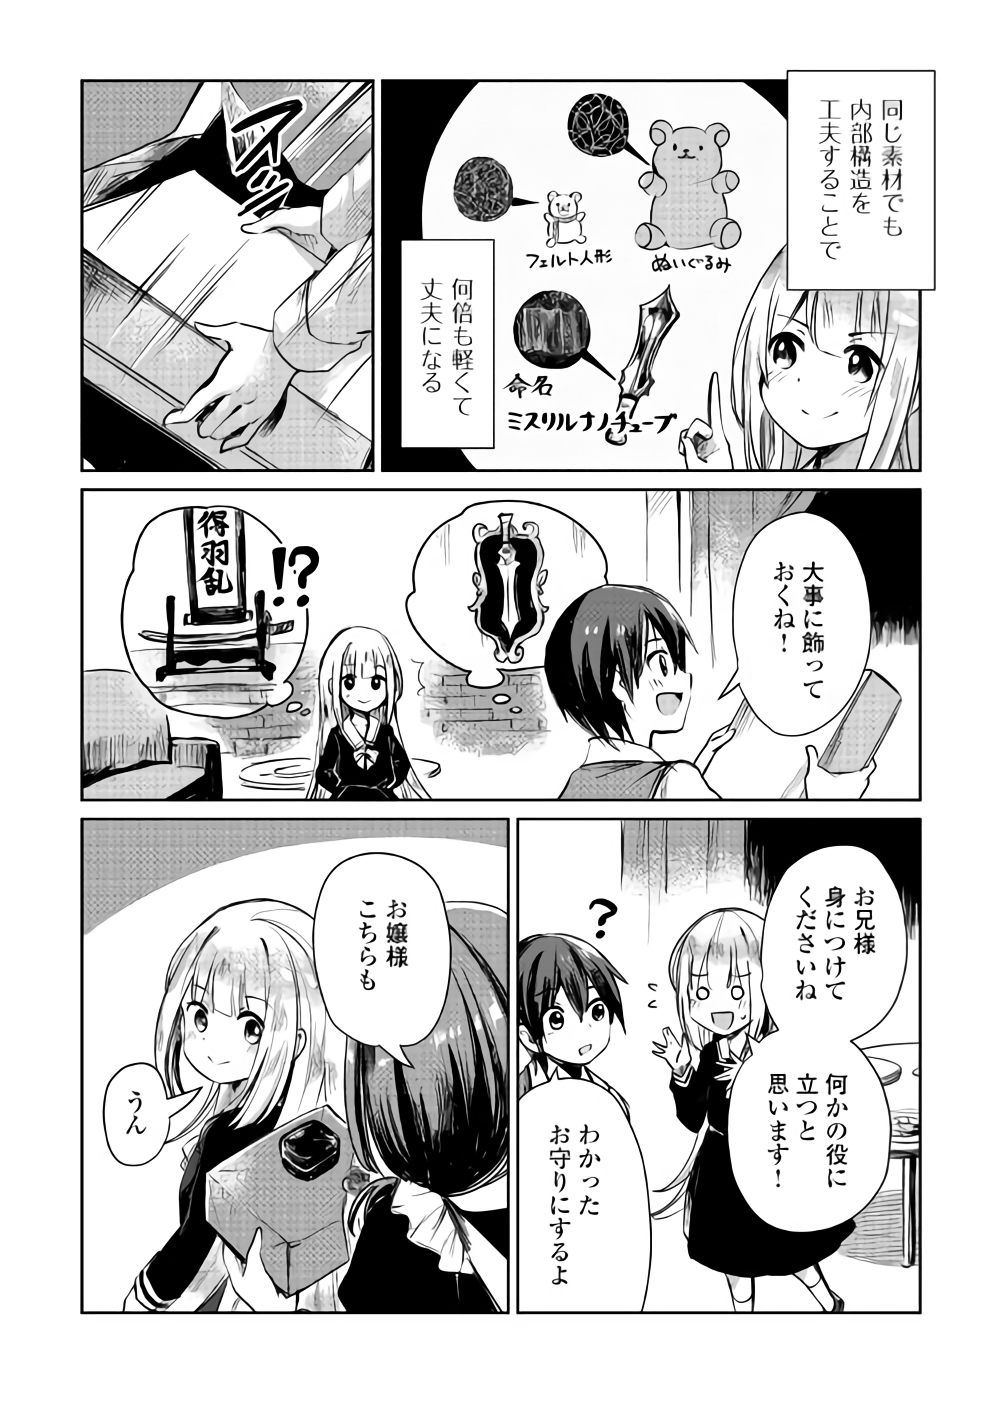 The Former Structural Researcher’s Story of Otherworldly Adventure 第7話 - Page 24